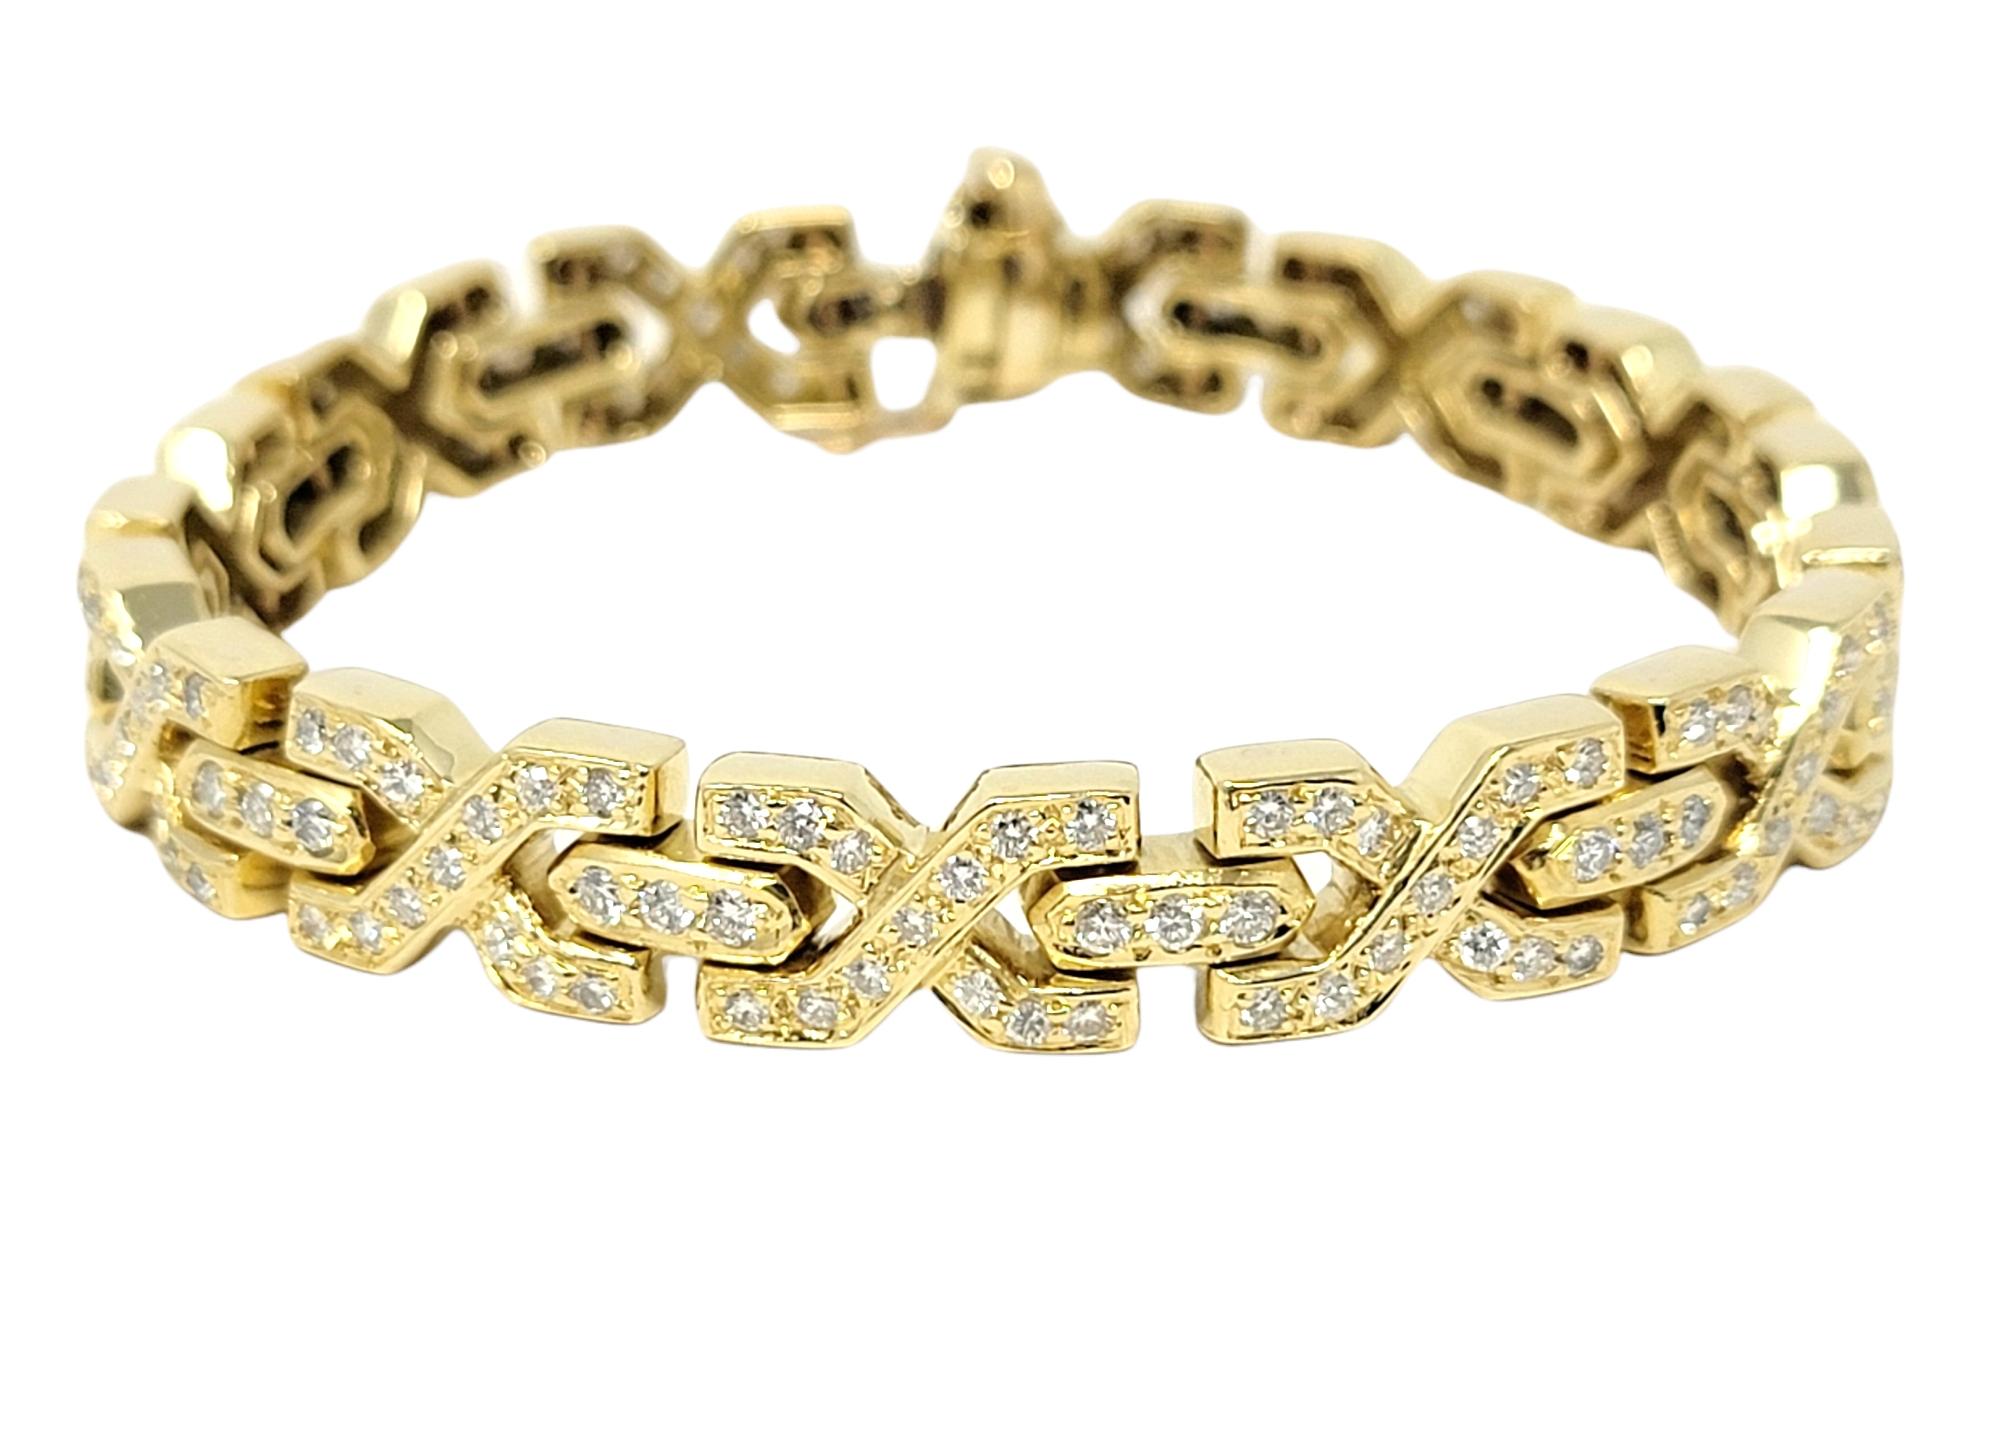 This beautiful diamond link bracelet sparkles with glamour and elegance. This sleek, shimmering piece features diamond embellished 18 karat yellow gold 'X' links set in a single row. The glittering diamonds sparkle beautifully from all angles,